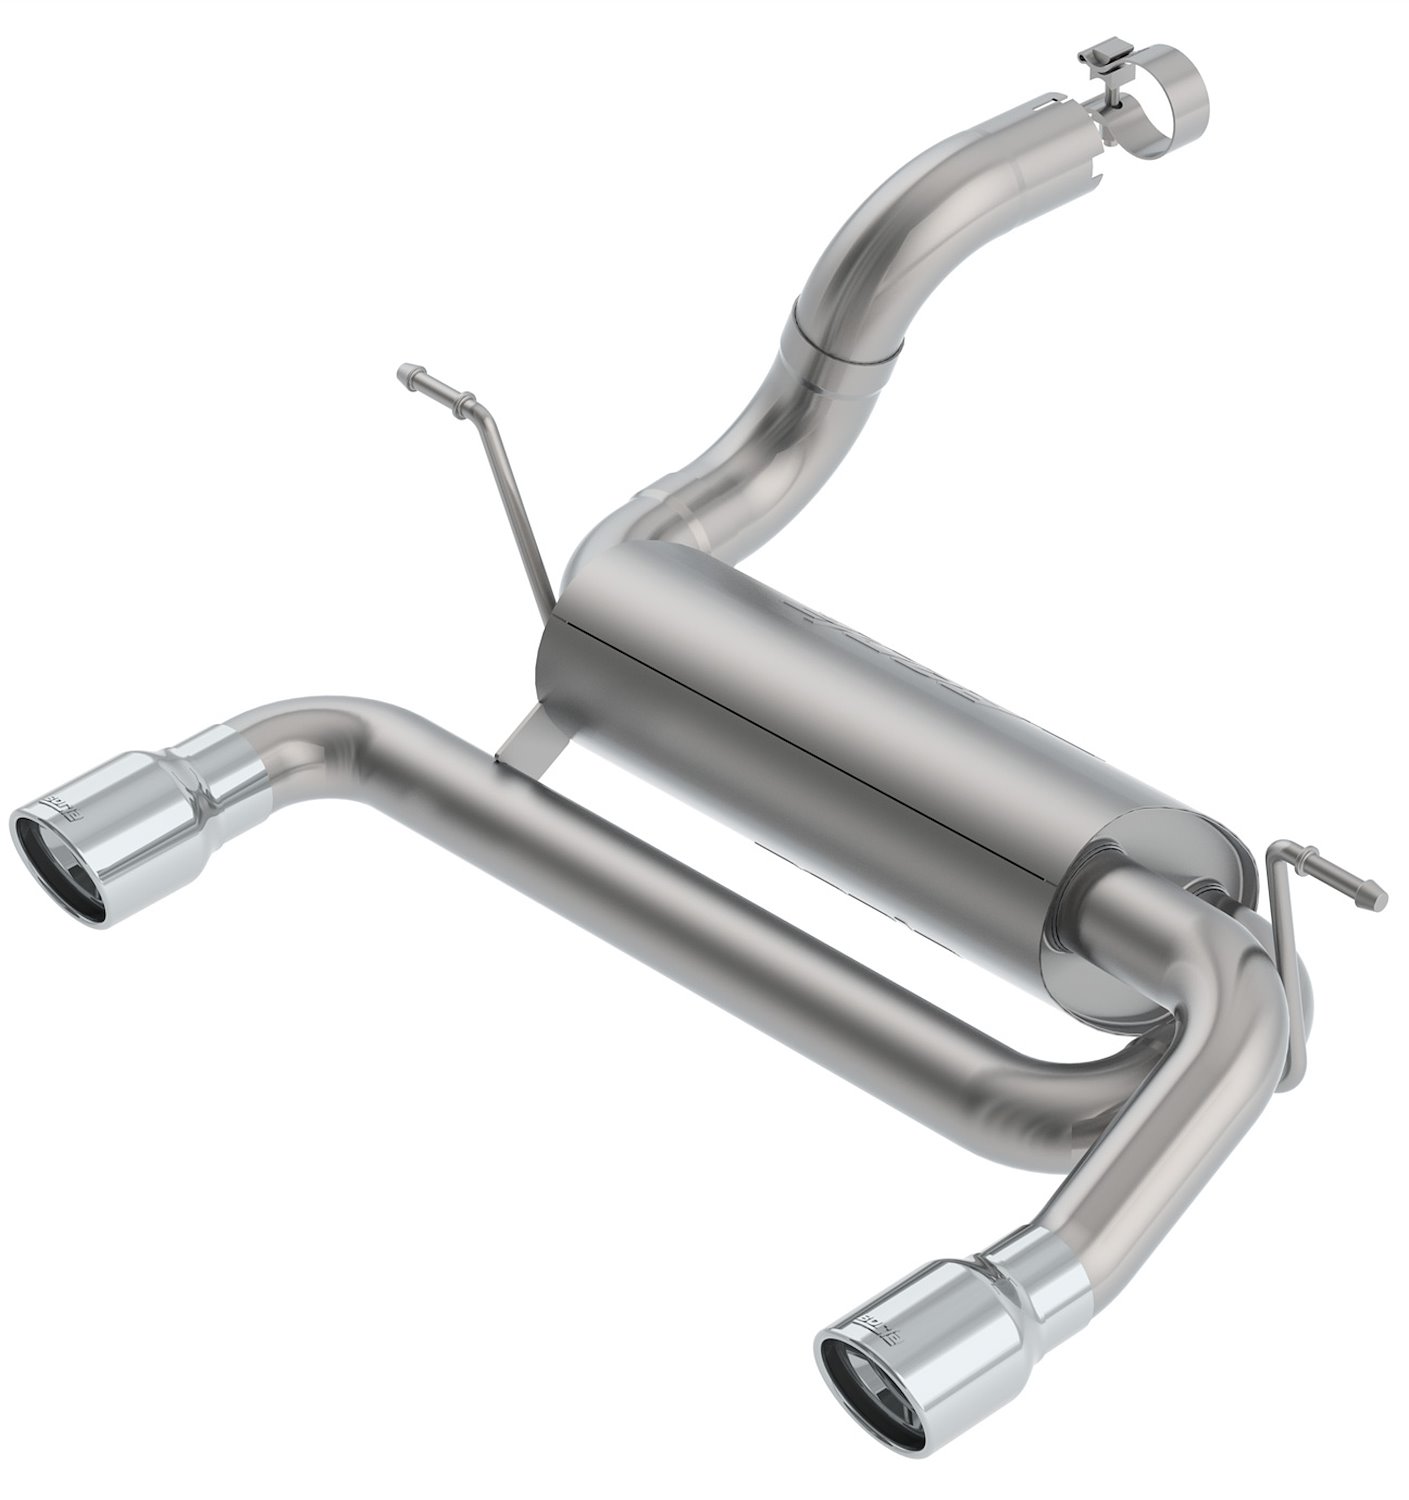 Axle-Back Exhaust System Fits 2018-2019 Jeep Wrangler JL/ JLU 2.0L - "Touring" Muffler - Polished Tips